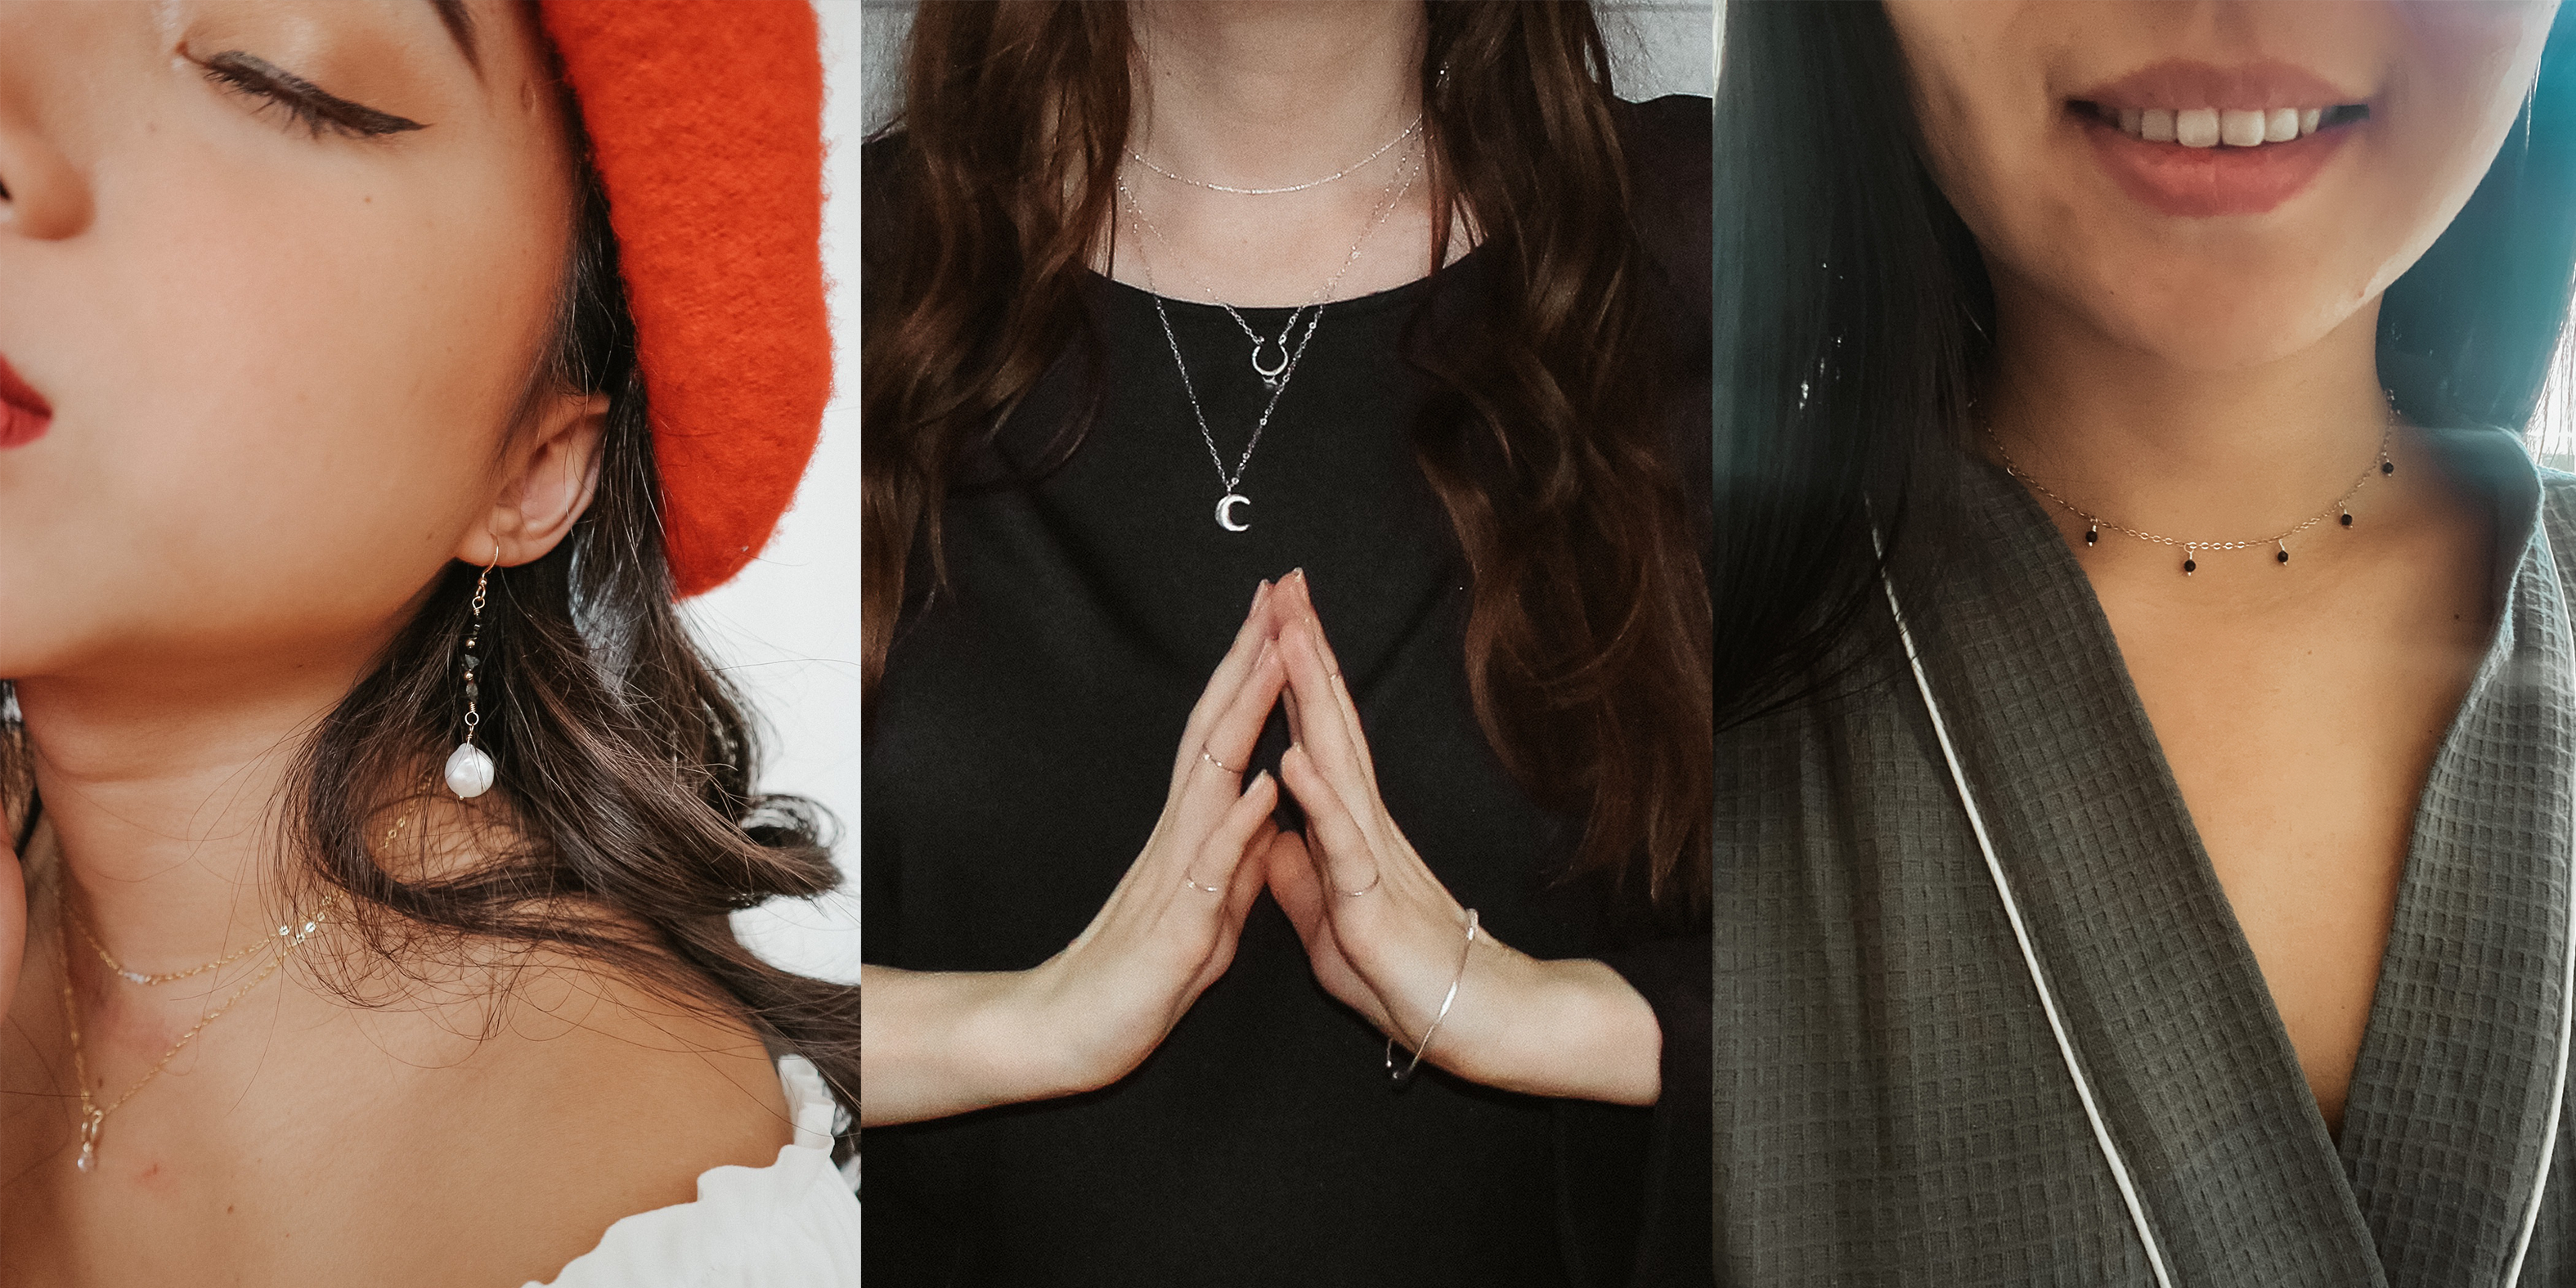 Quiz: What Is Your Personal Jewelry Style?